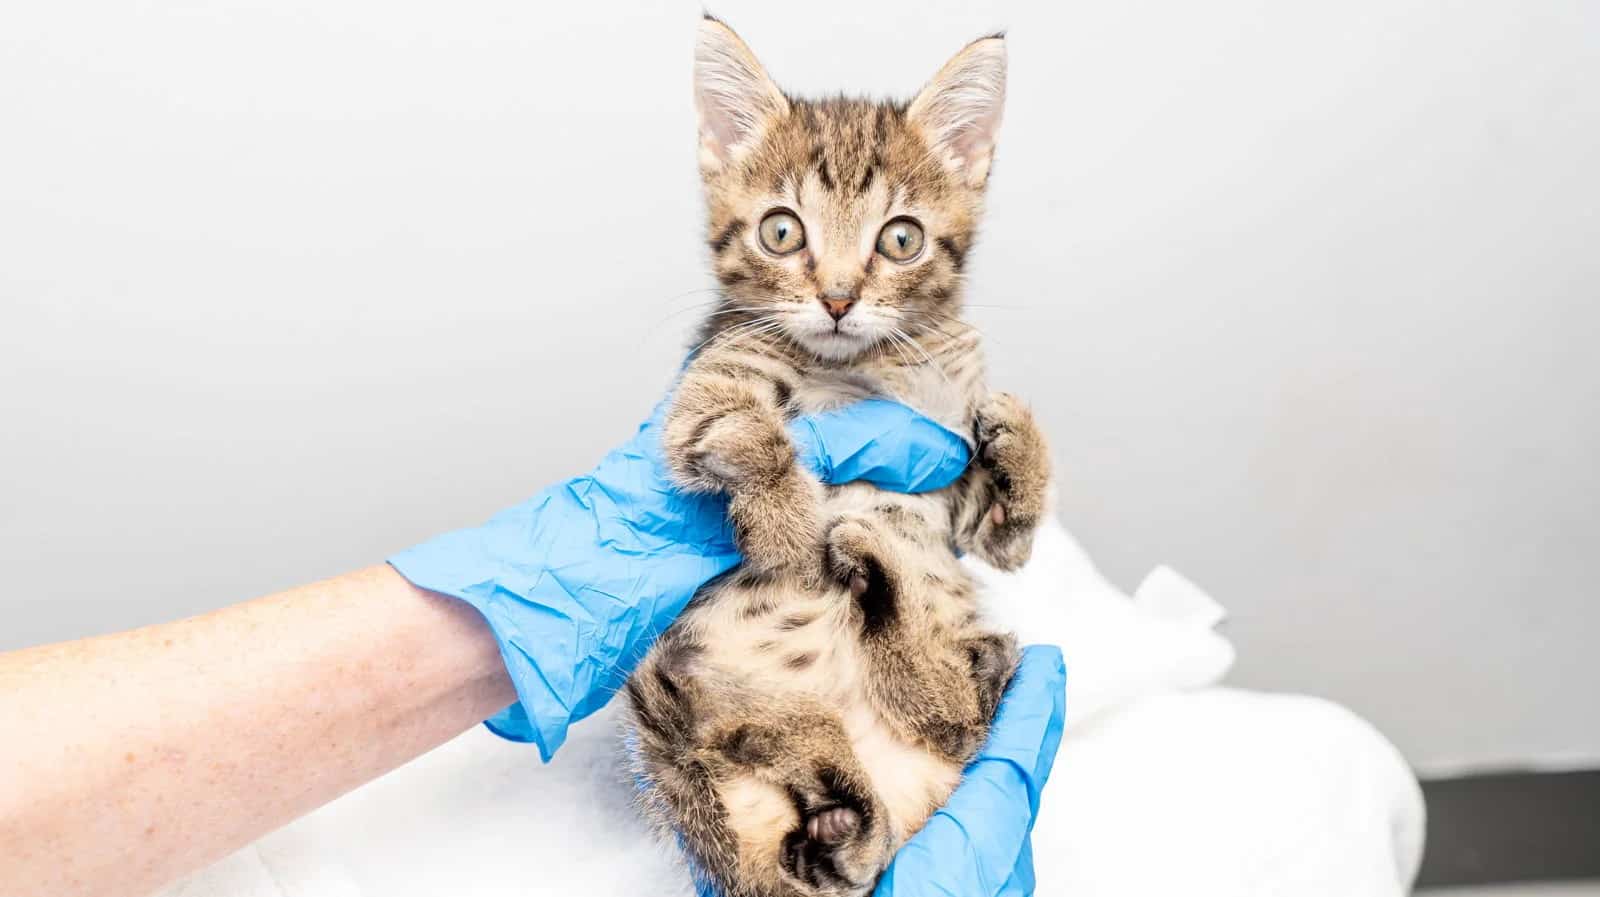 Cruz, a young kitten with deformities on all four of his legs.